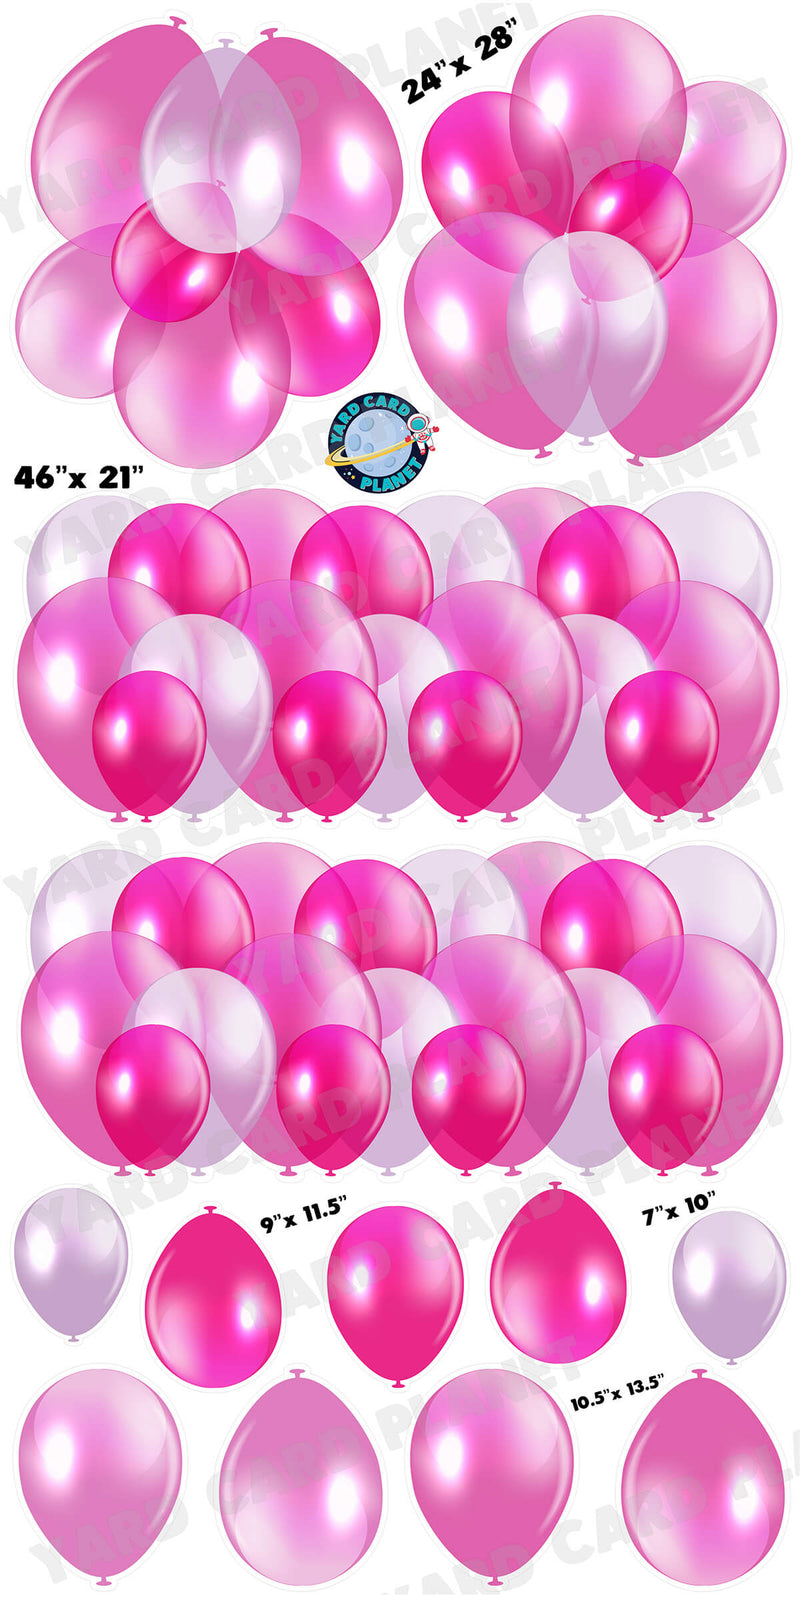 Pink Balloon Panels, Bouquets and Singles Yard Card Set